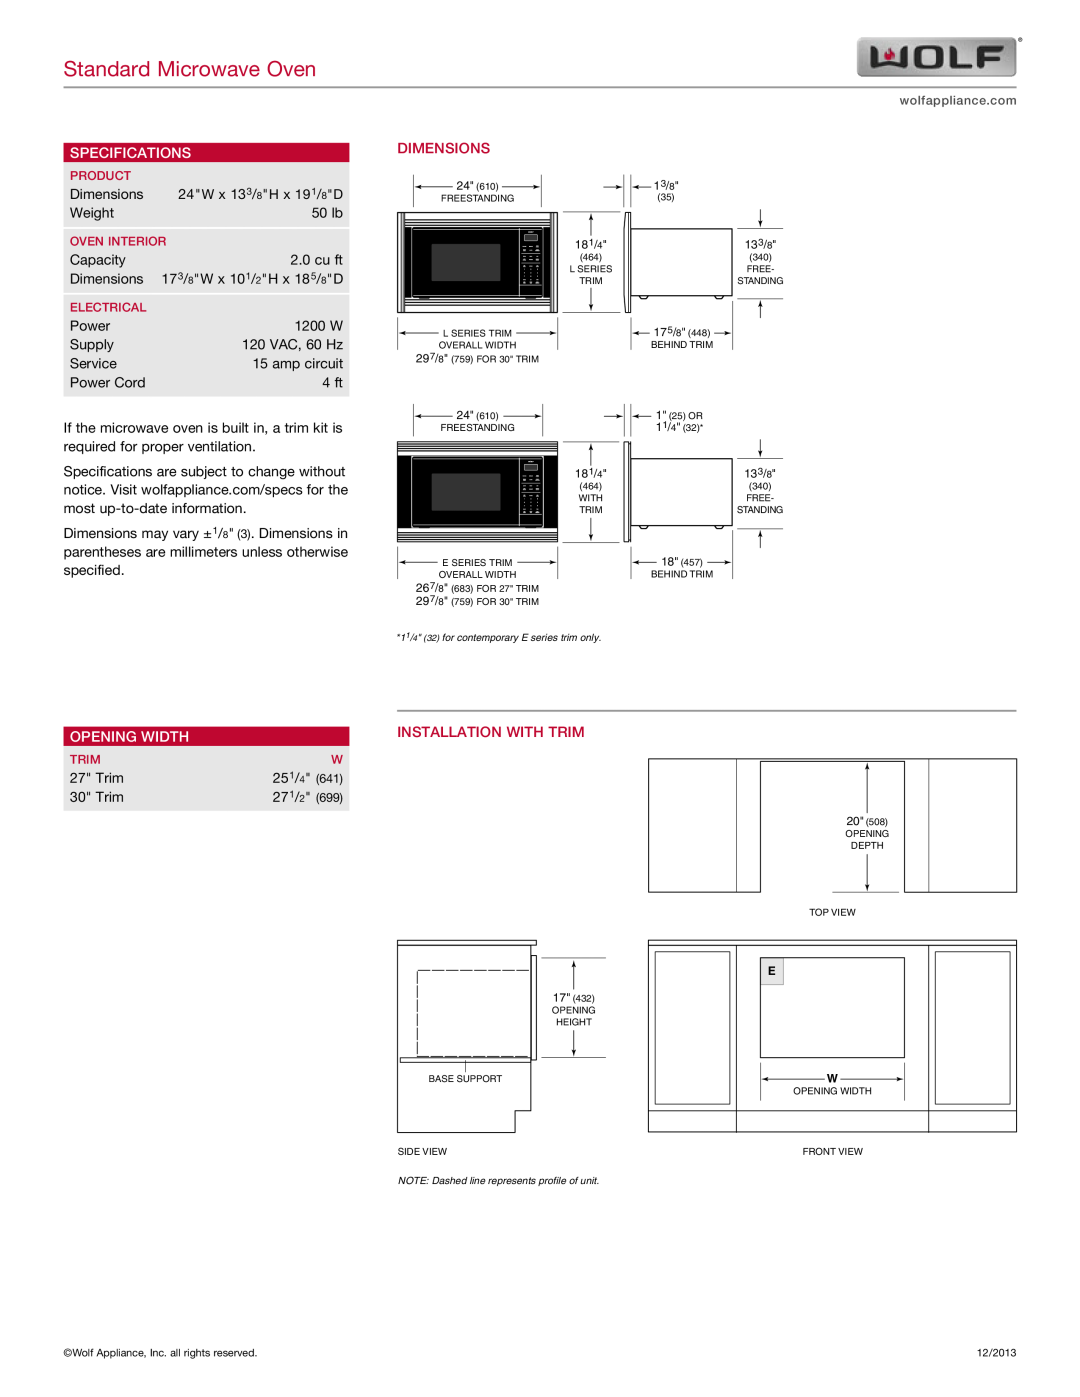 Wolf MS24, 30" L SERIES manual Specifications, Dimensions, opening width, Installation WITH TRIM, Standard Microwave Oven 